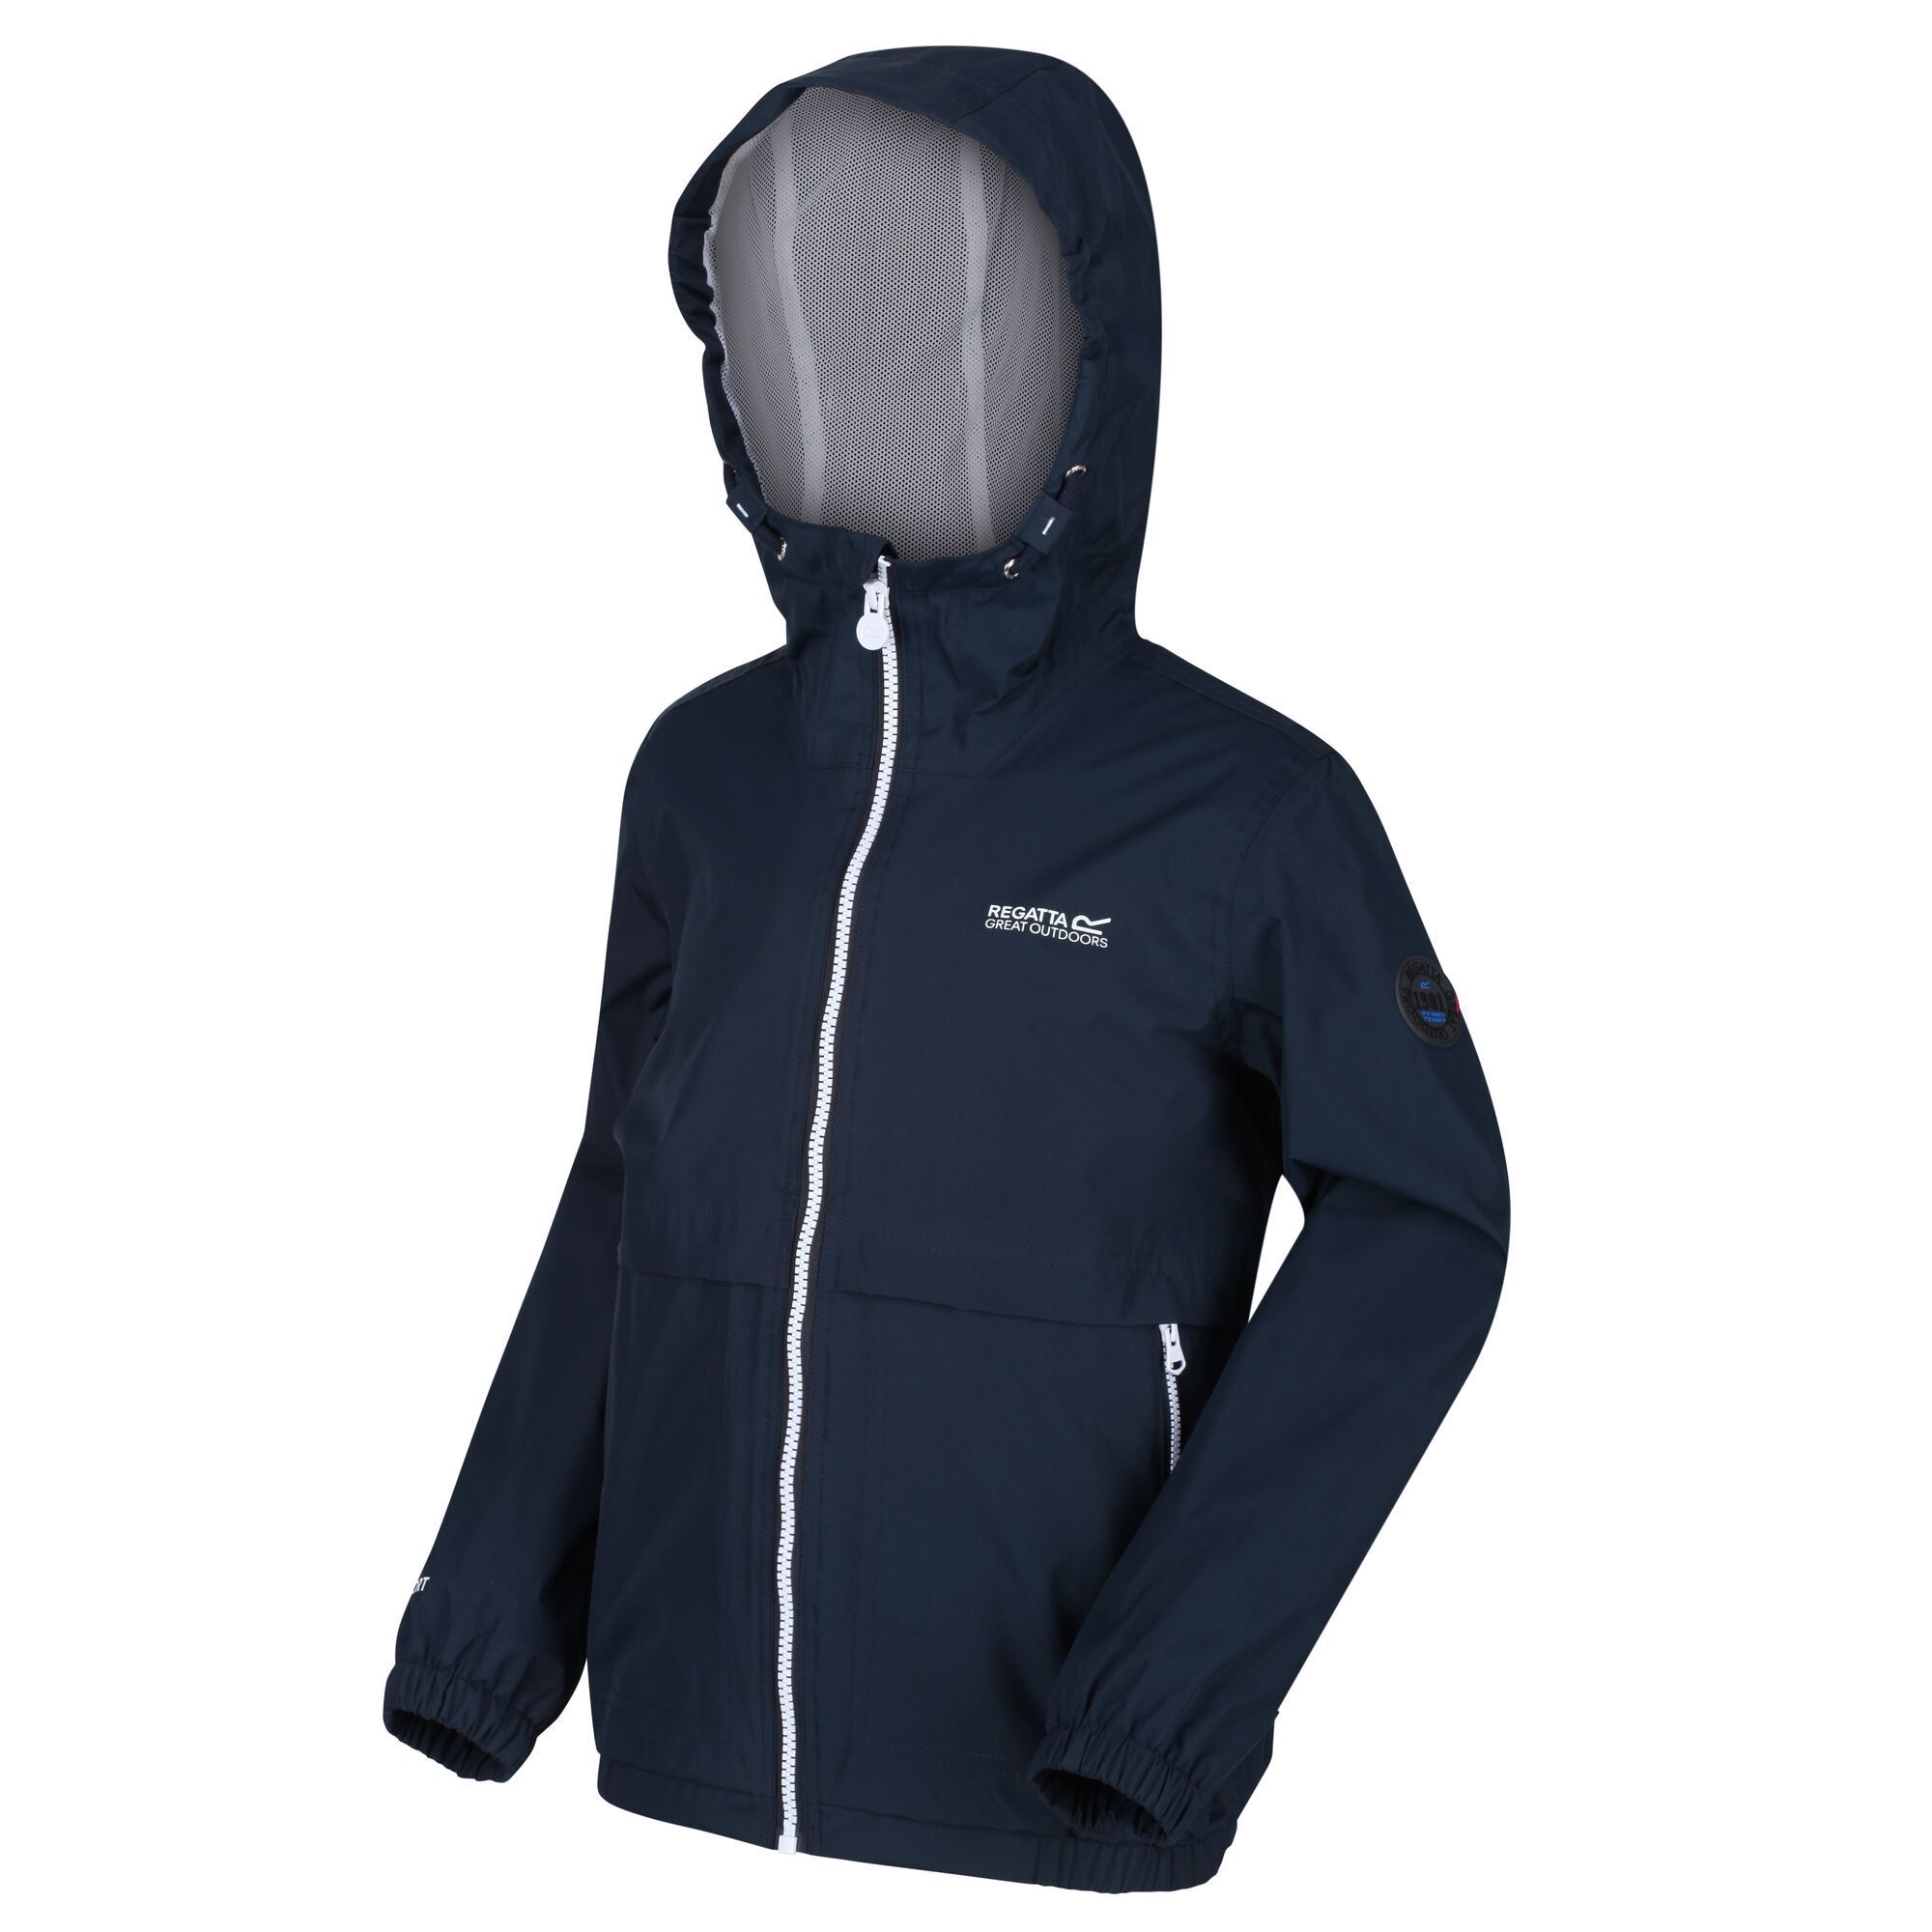 Material: 100% Polyester. Durable, water-repellent jacket with elasticated hood. Taped seams, elasticated hem and cuffs.  Part mesh, part polyester taffeta lining. 2 zipped lower pockets. Regatta outdoors logo print on the chest.